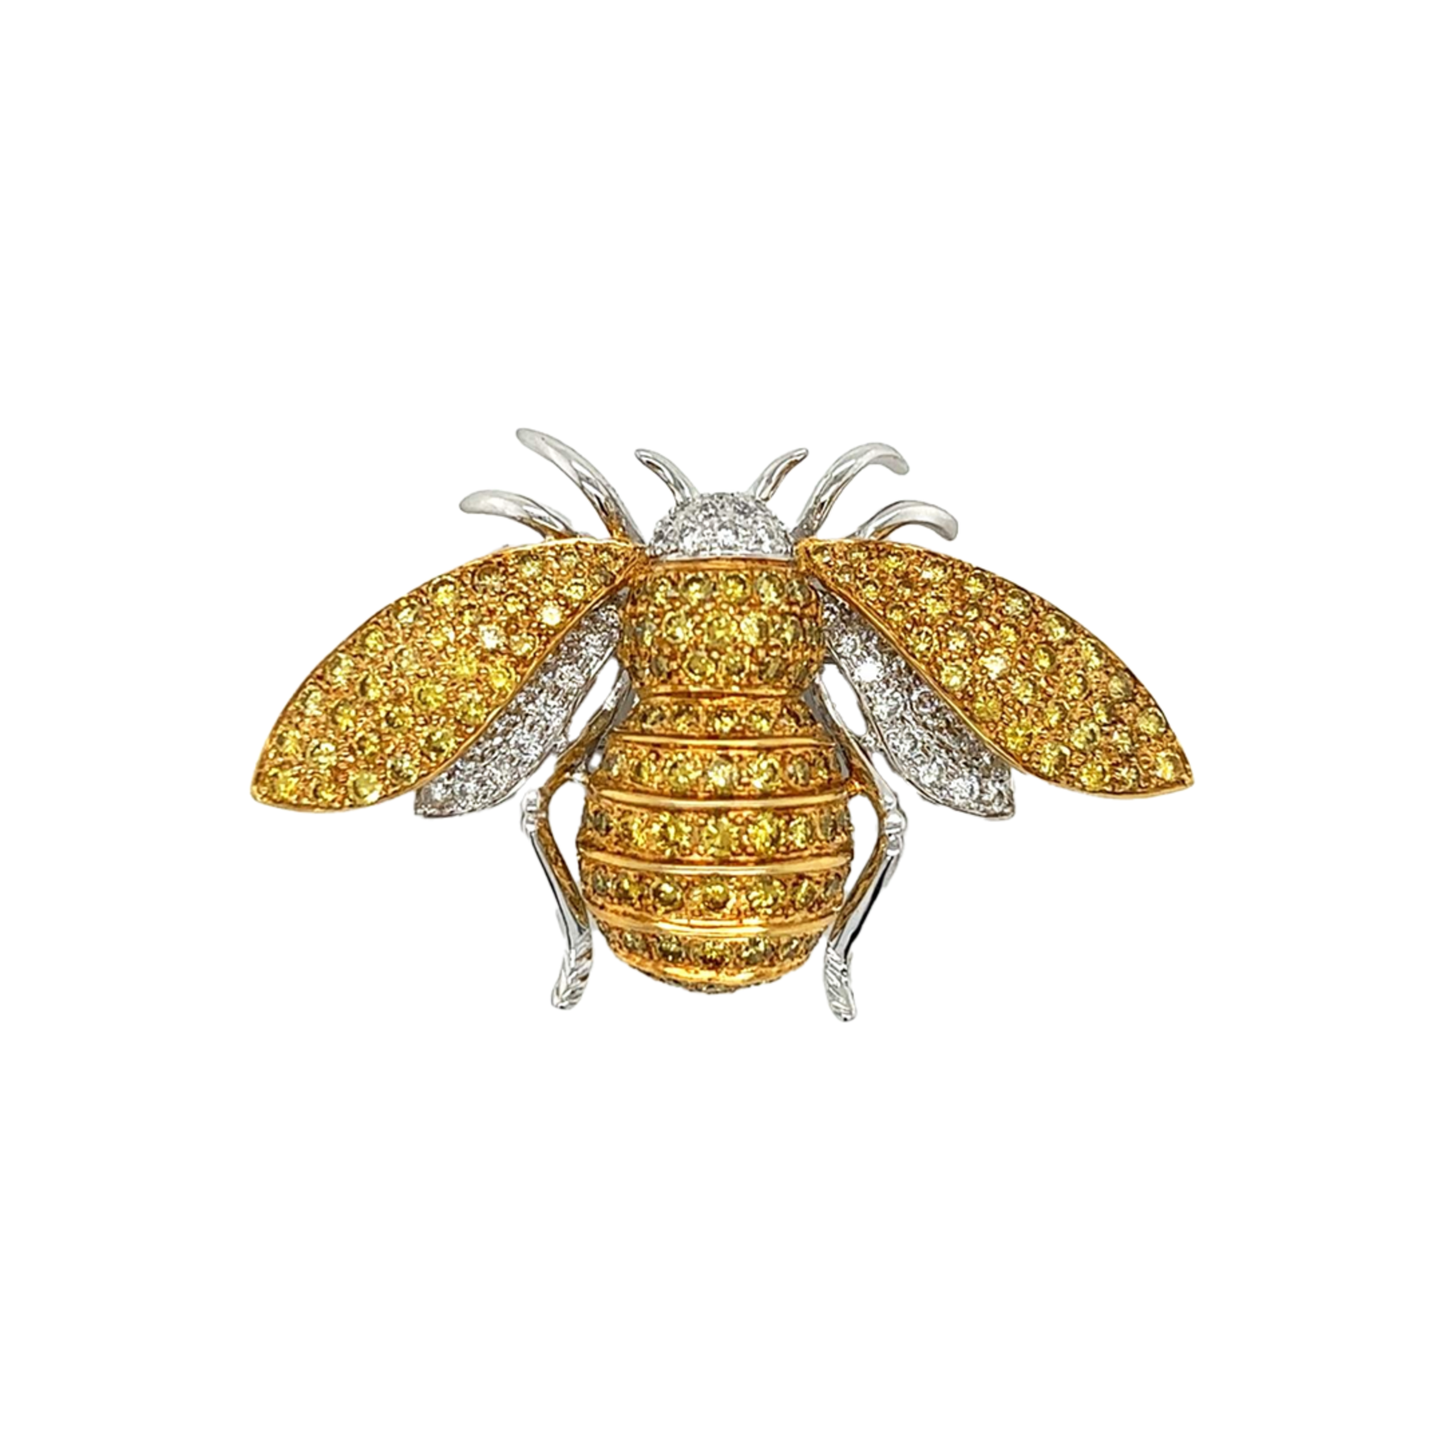 Post-1980s 18KT Yellow & White Gold Diamond Bumble Bee Brooch front